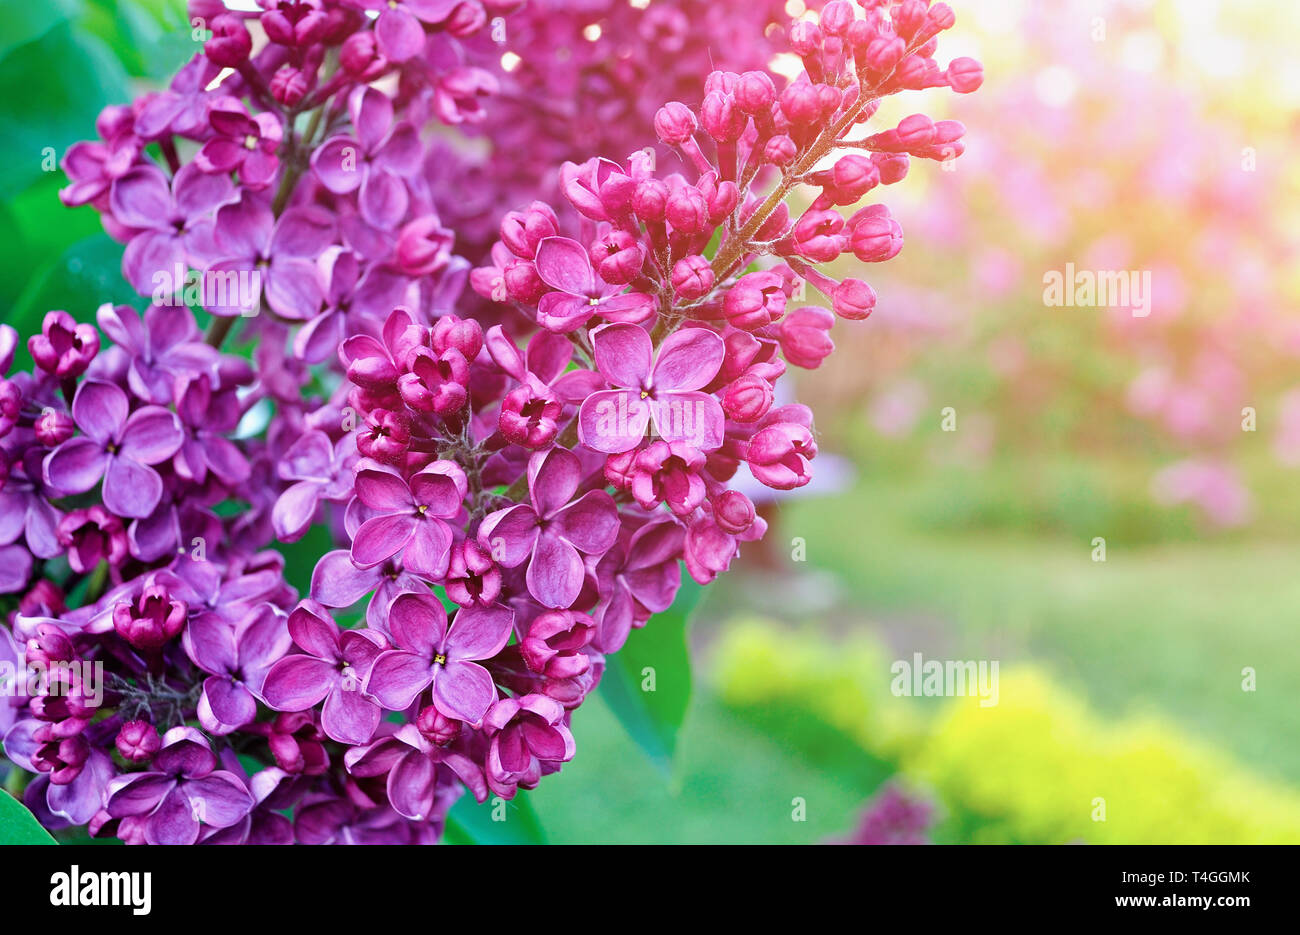 Lilac flowers, spring floral background. Selective focus at the central flowers Stock Photo